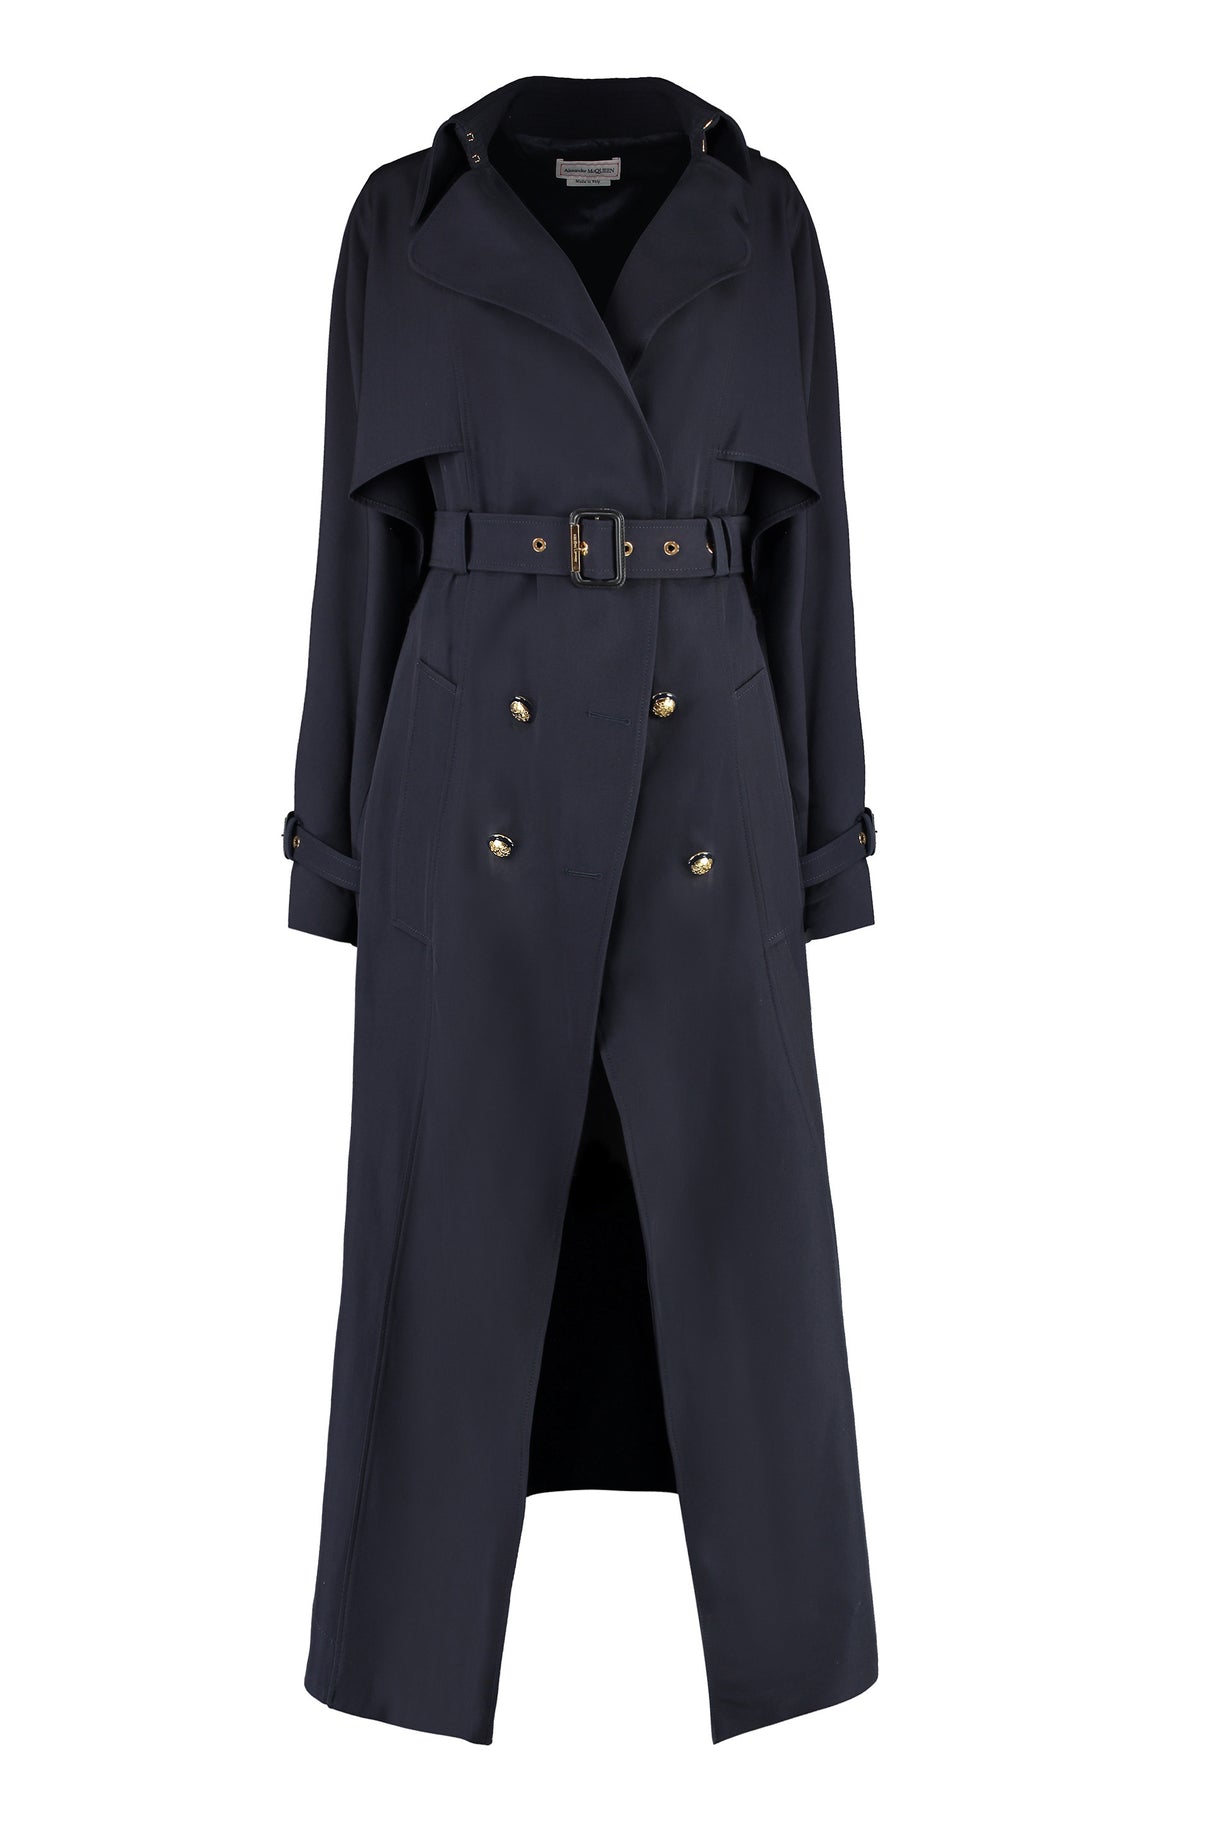 ALEXANDER MCQUEEN Women's Wool and Cotton Trench Jacket with Coordinated Belt and Contrasting Color Buttons